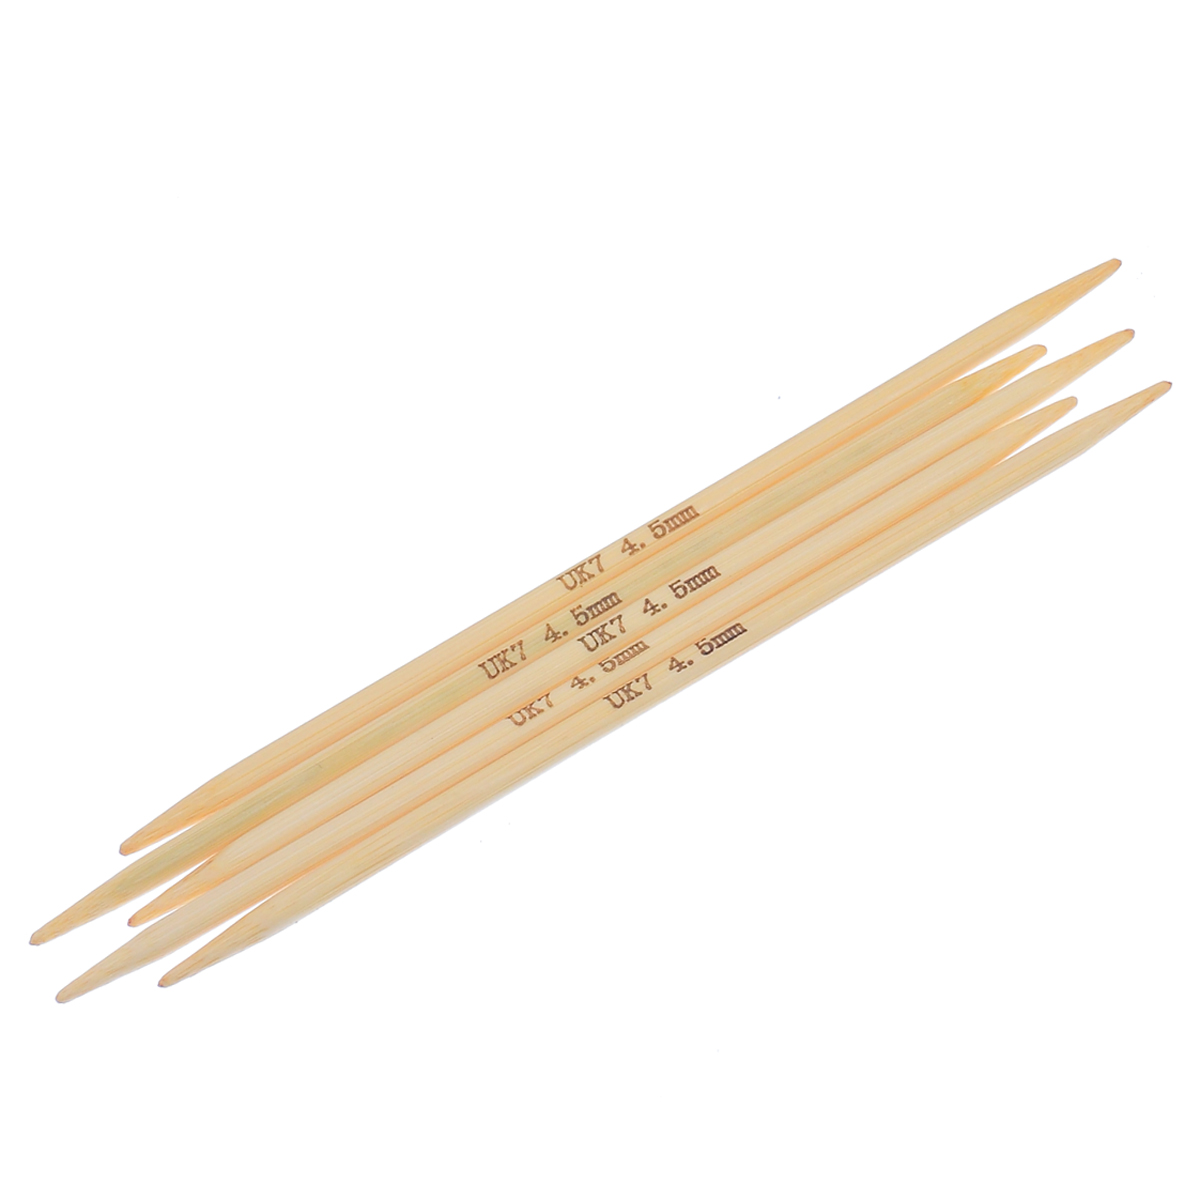 Picture of (UK7 4.5mm) Bamboo Double Pointed Knitting Needles Natural 15cm(5 7/8") long, 1 Set ( 5 PCs/Set)